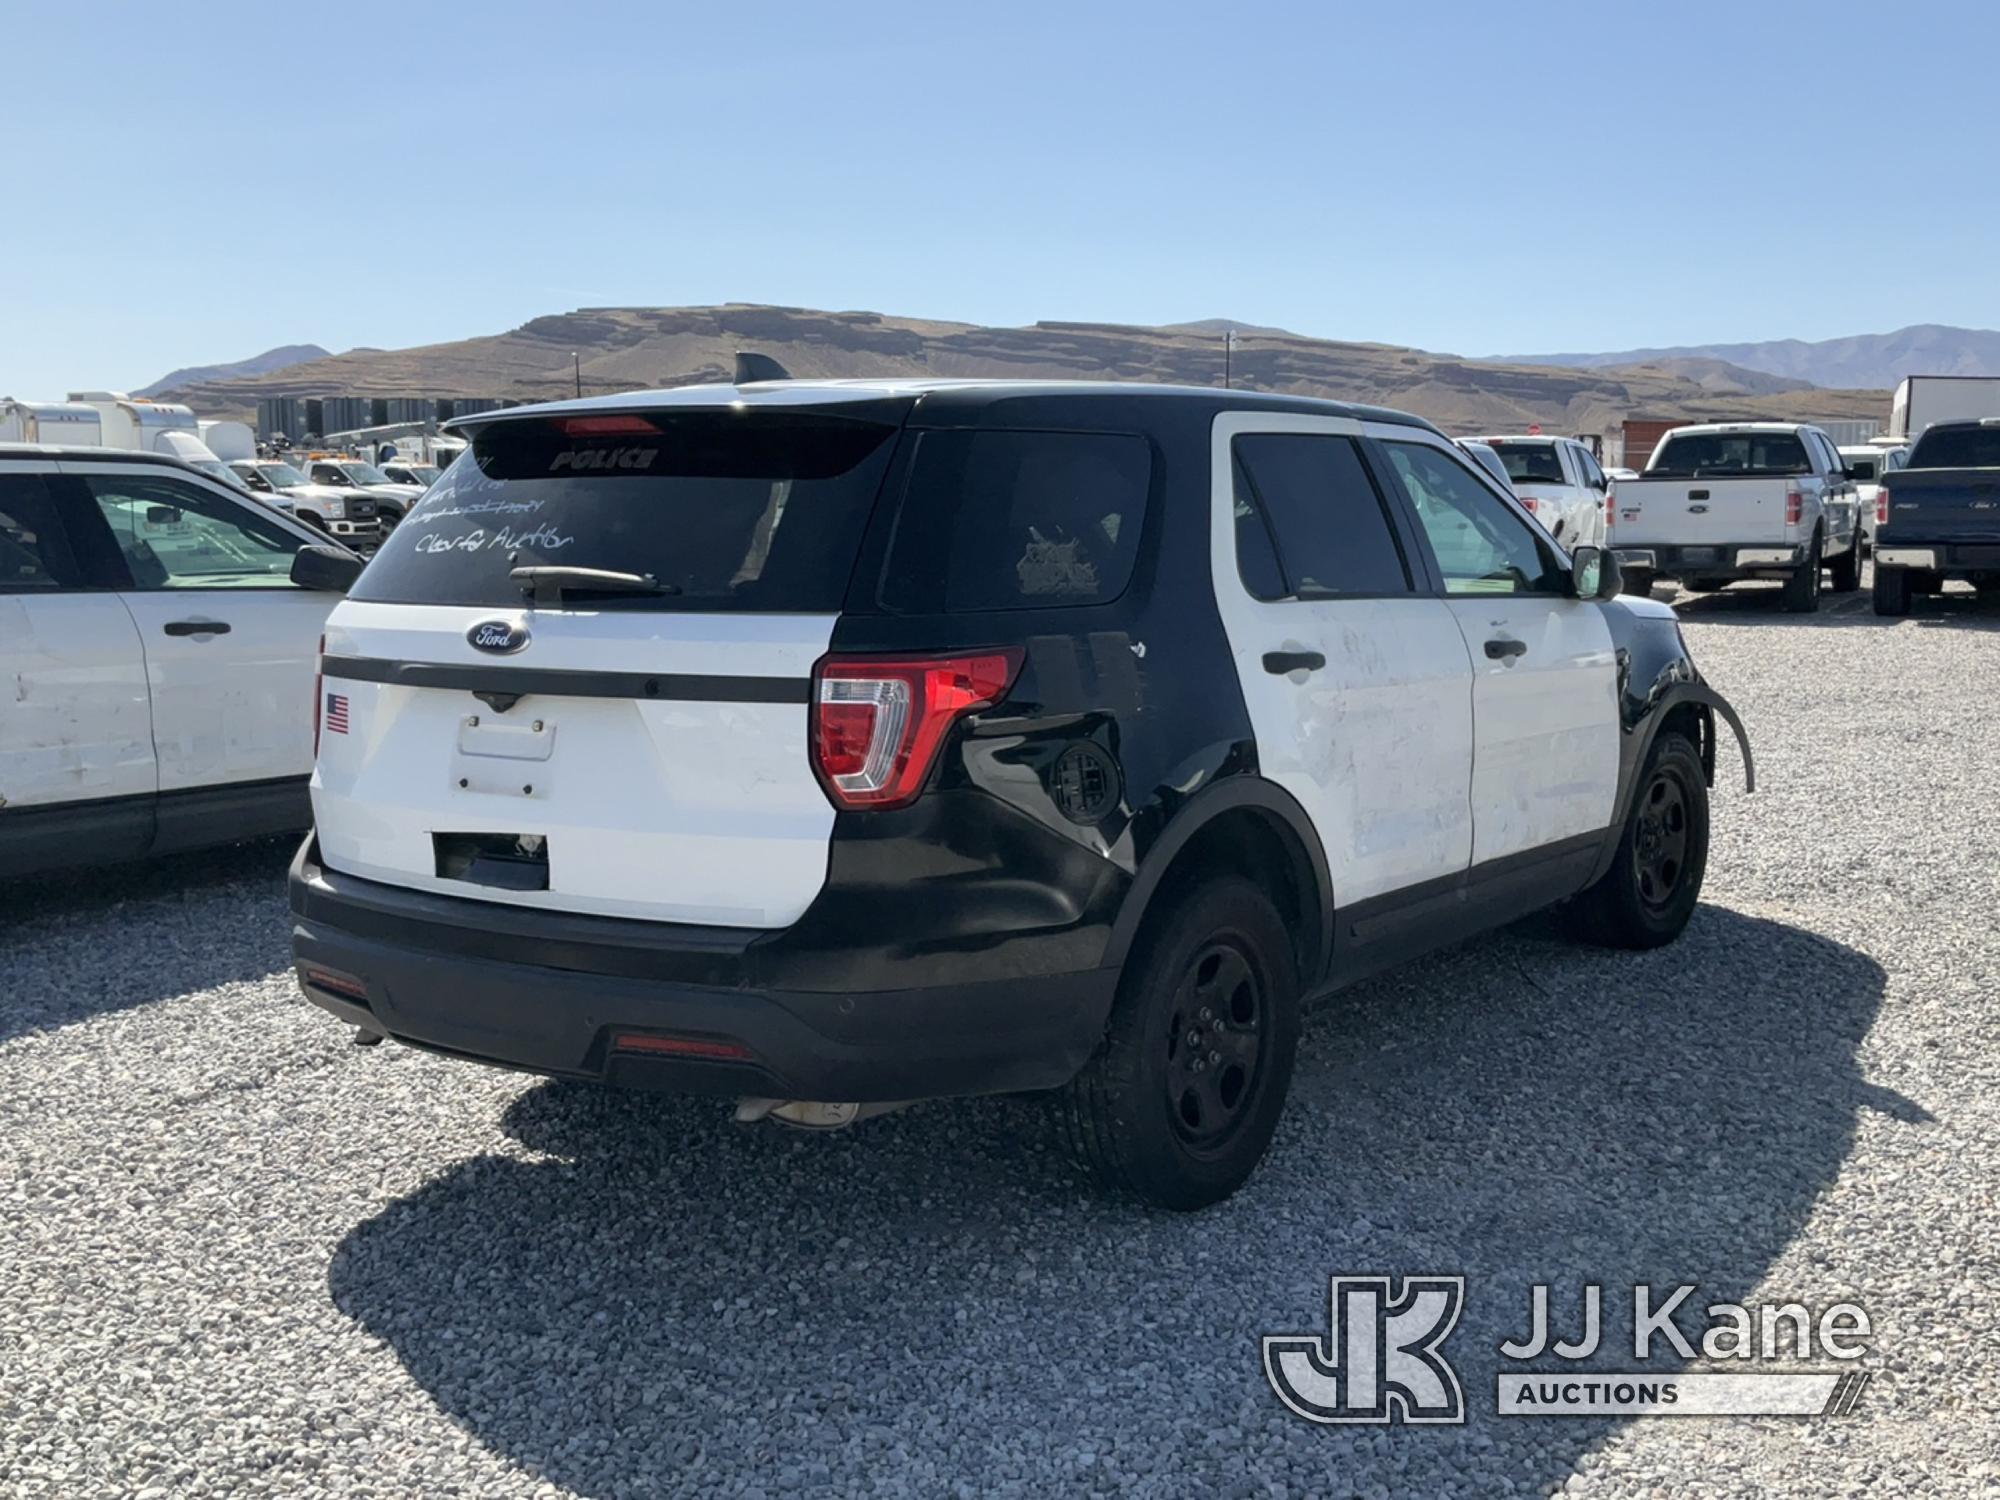 (Las Vegas, NV) 2018 Ford Explorer AWD Police Interceptor Dealers Only, Towed In, Body Damage, Odome